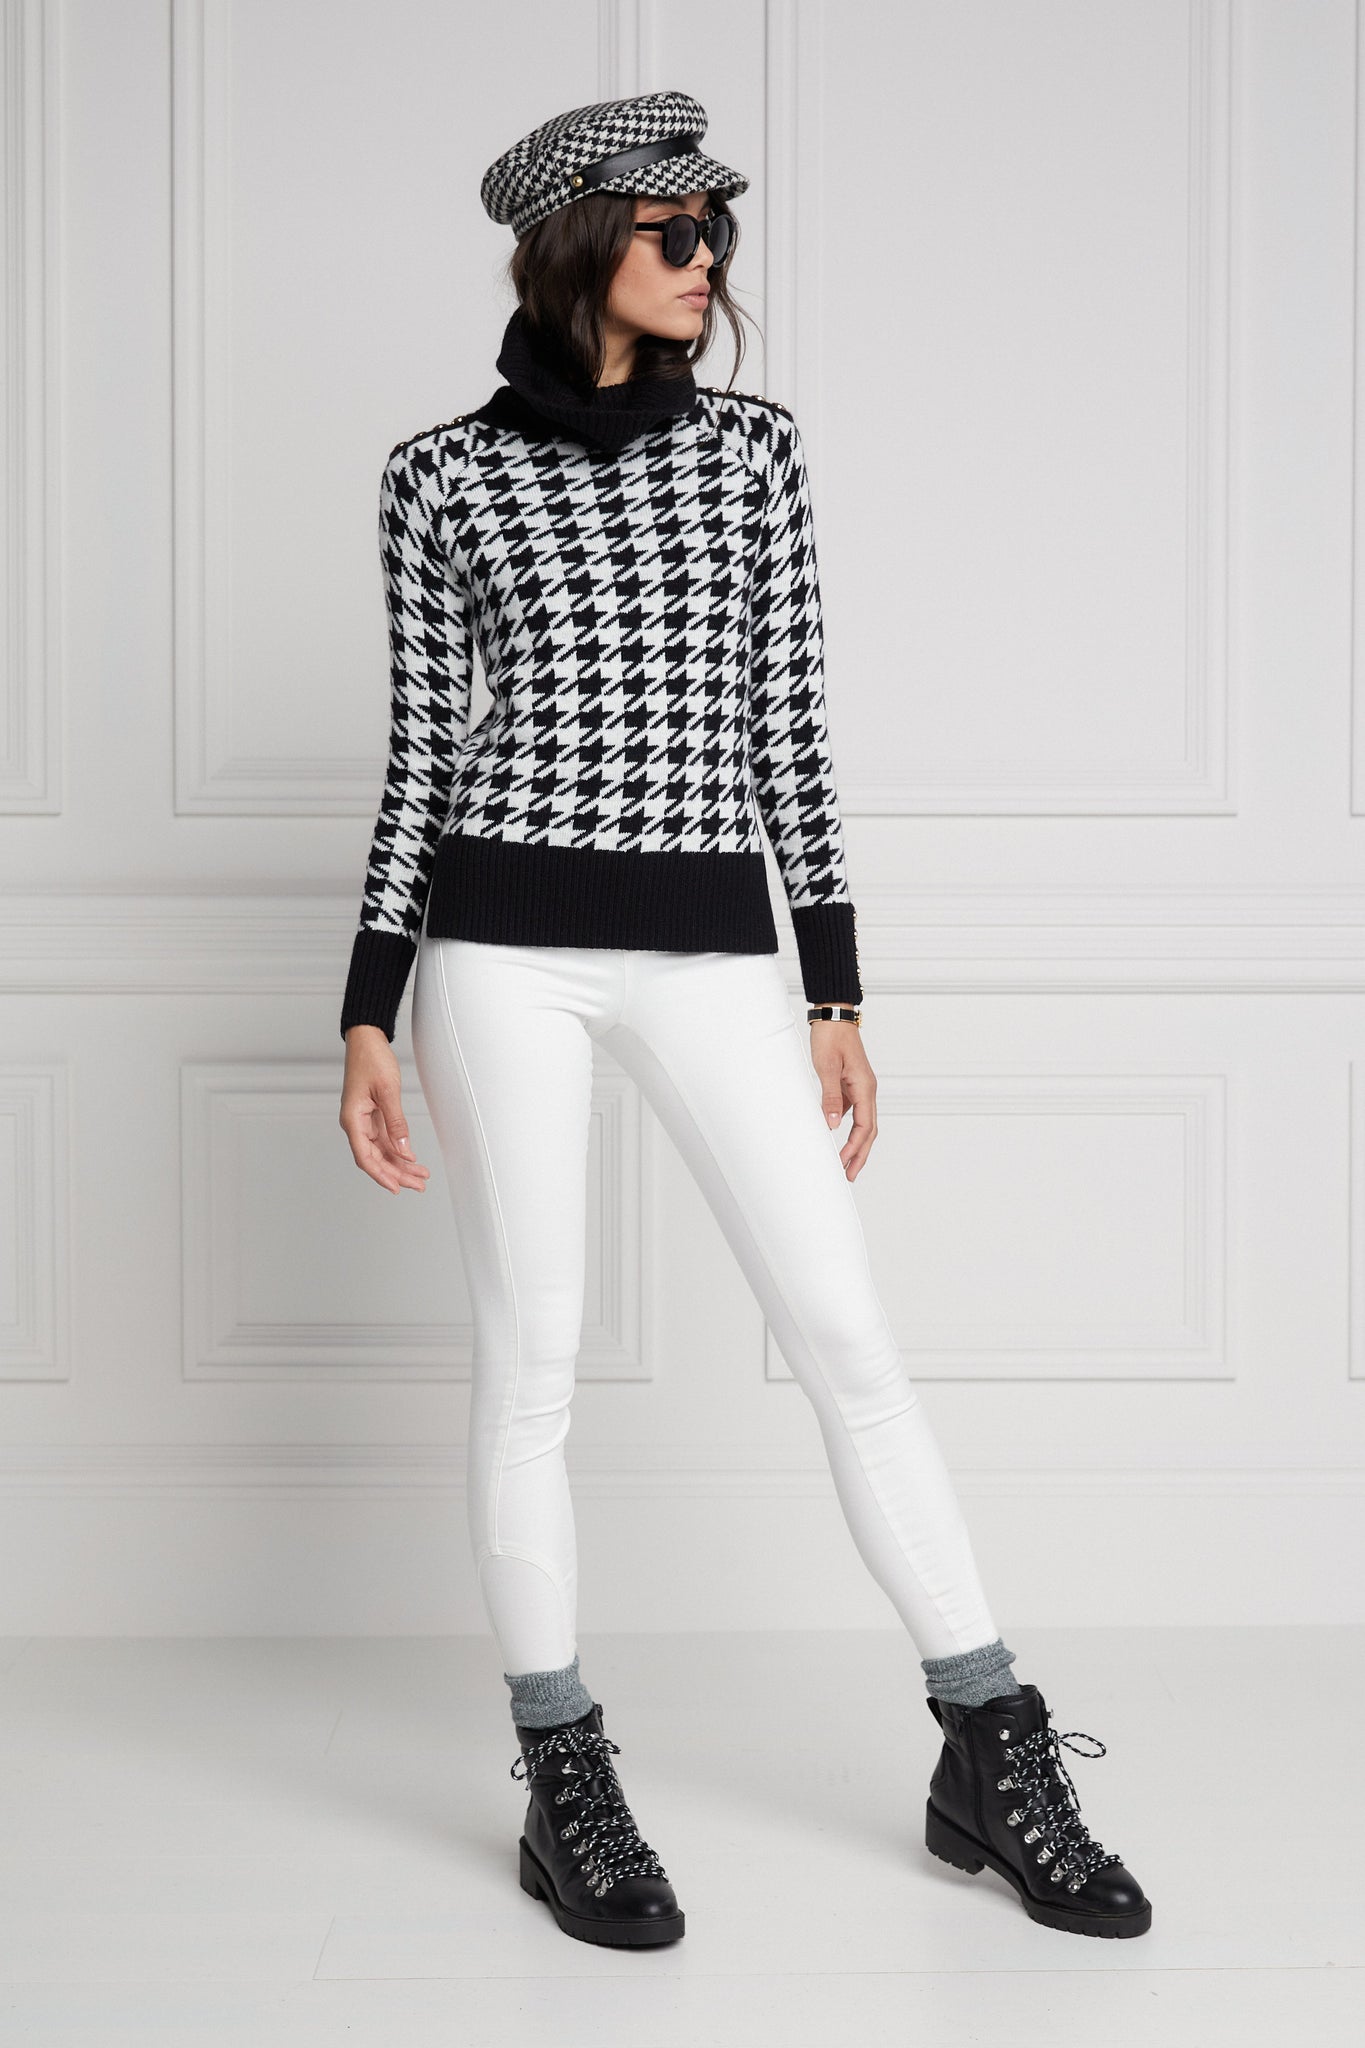 a classic black and white houndstooth jumper with contrast black cuffs, roll neck and split ribbed hem with gold button detail on the cuffs and collar